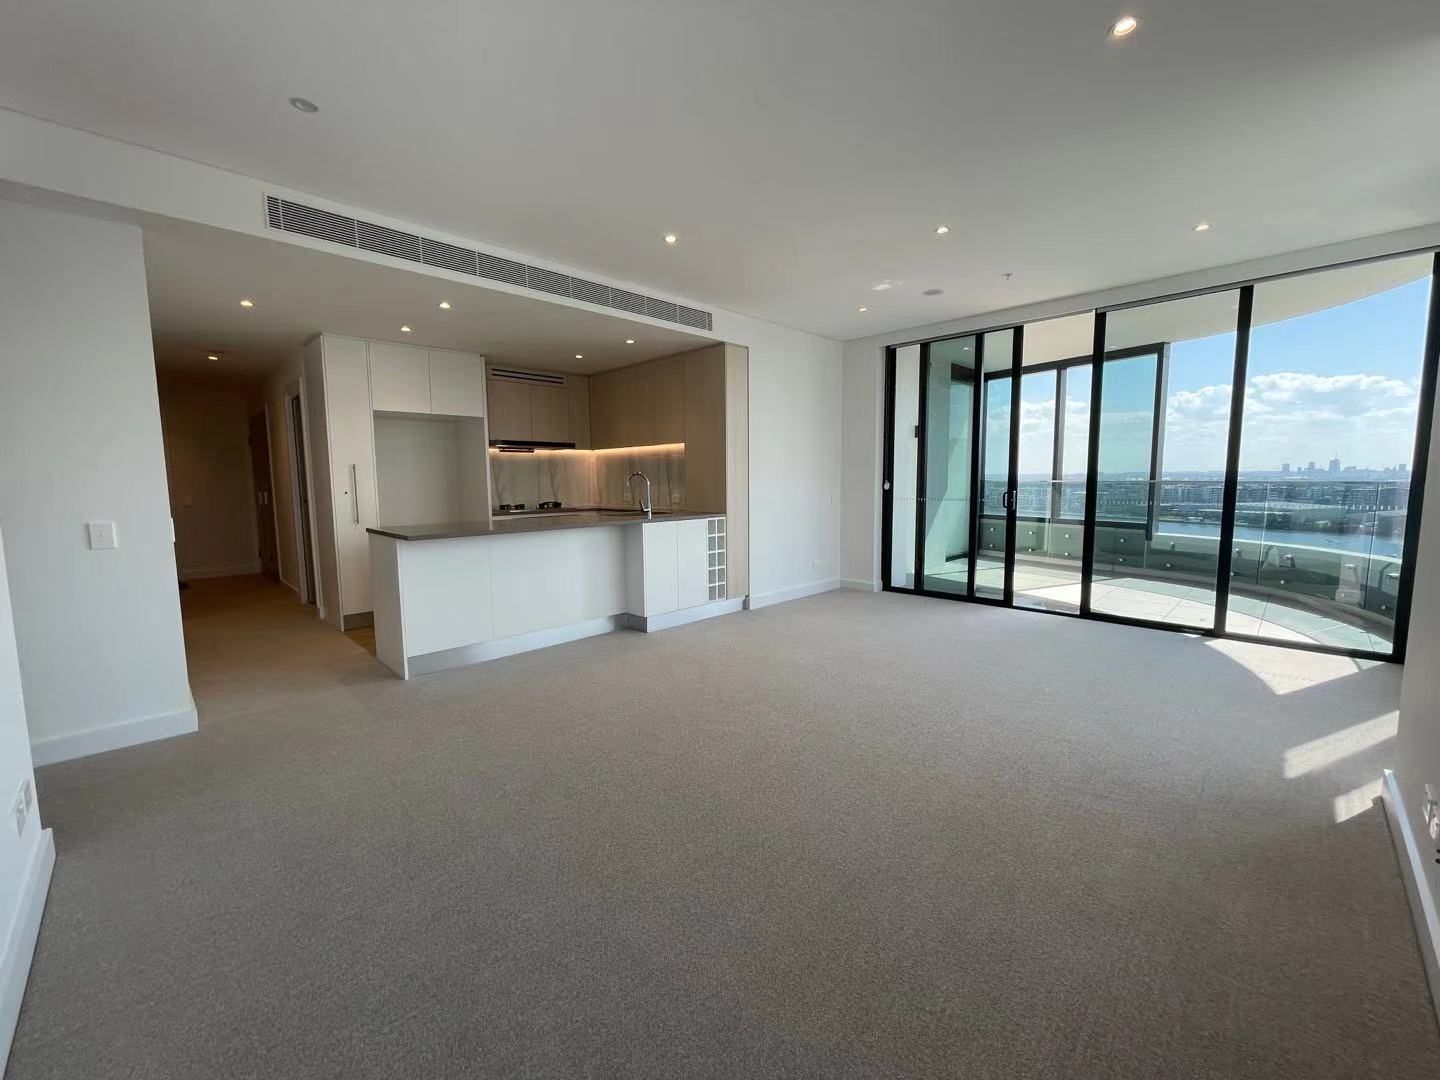 3 bedrooms Apartment / Unit / Flat in B1002/21 marquet st RHODES NSW, 2138